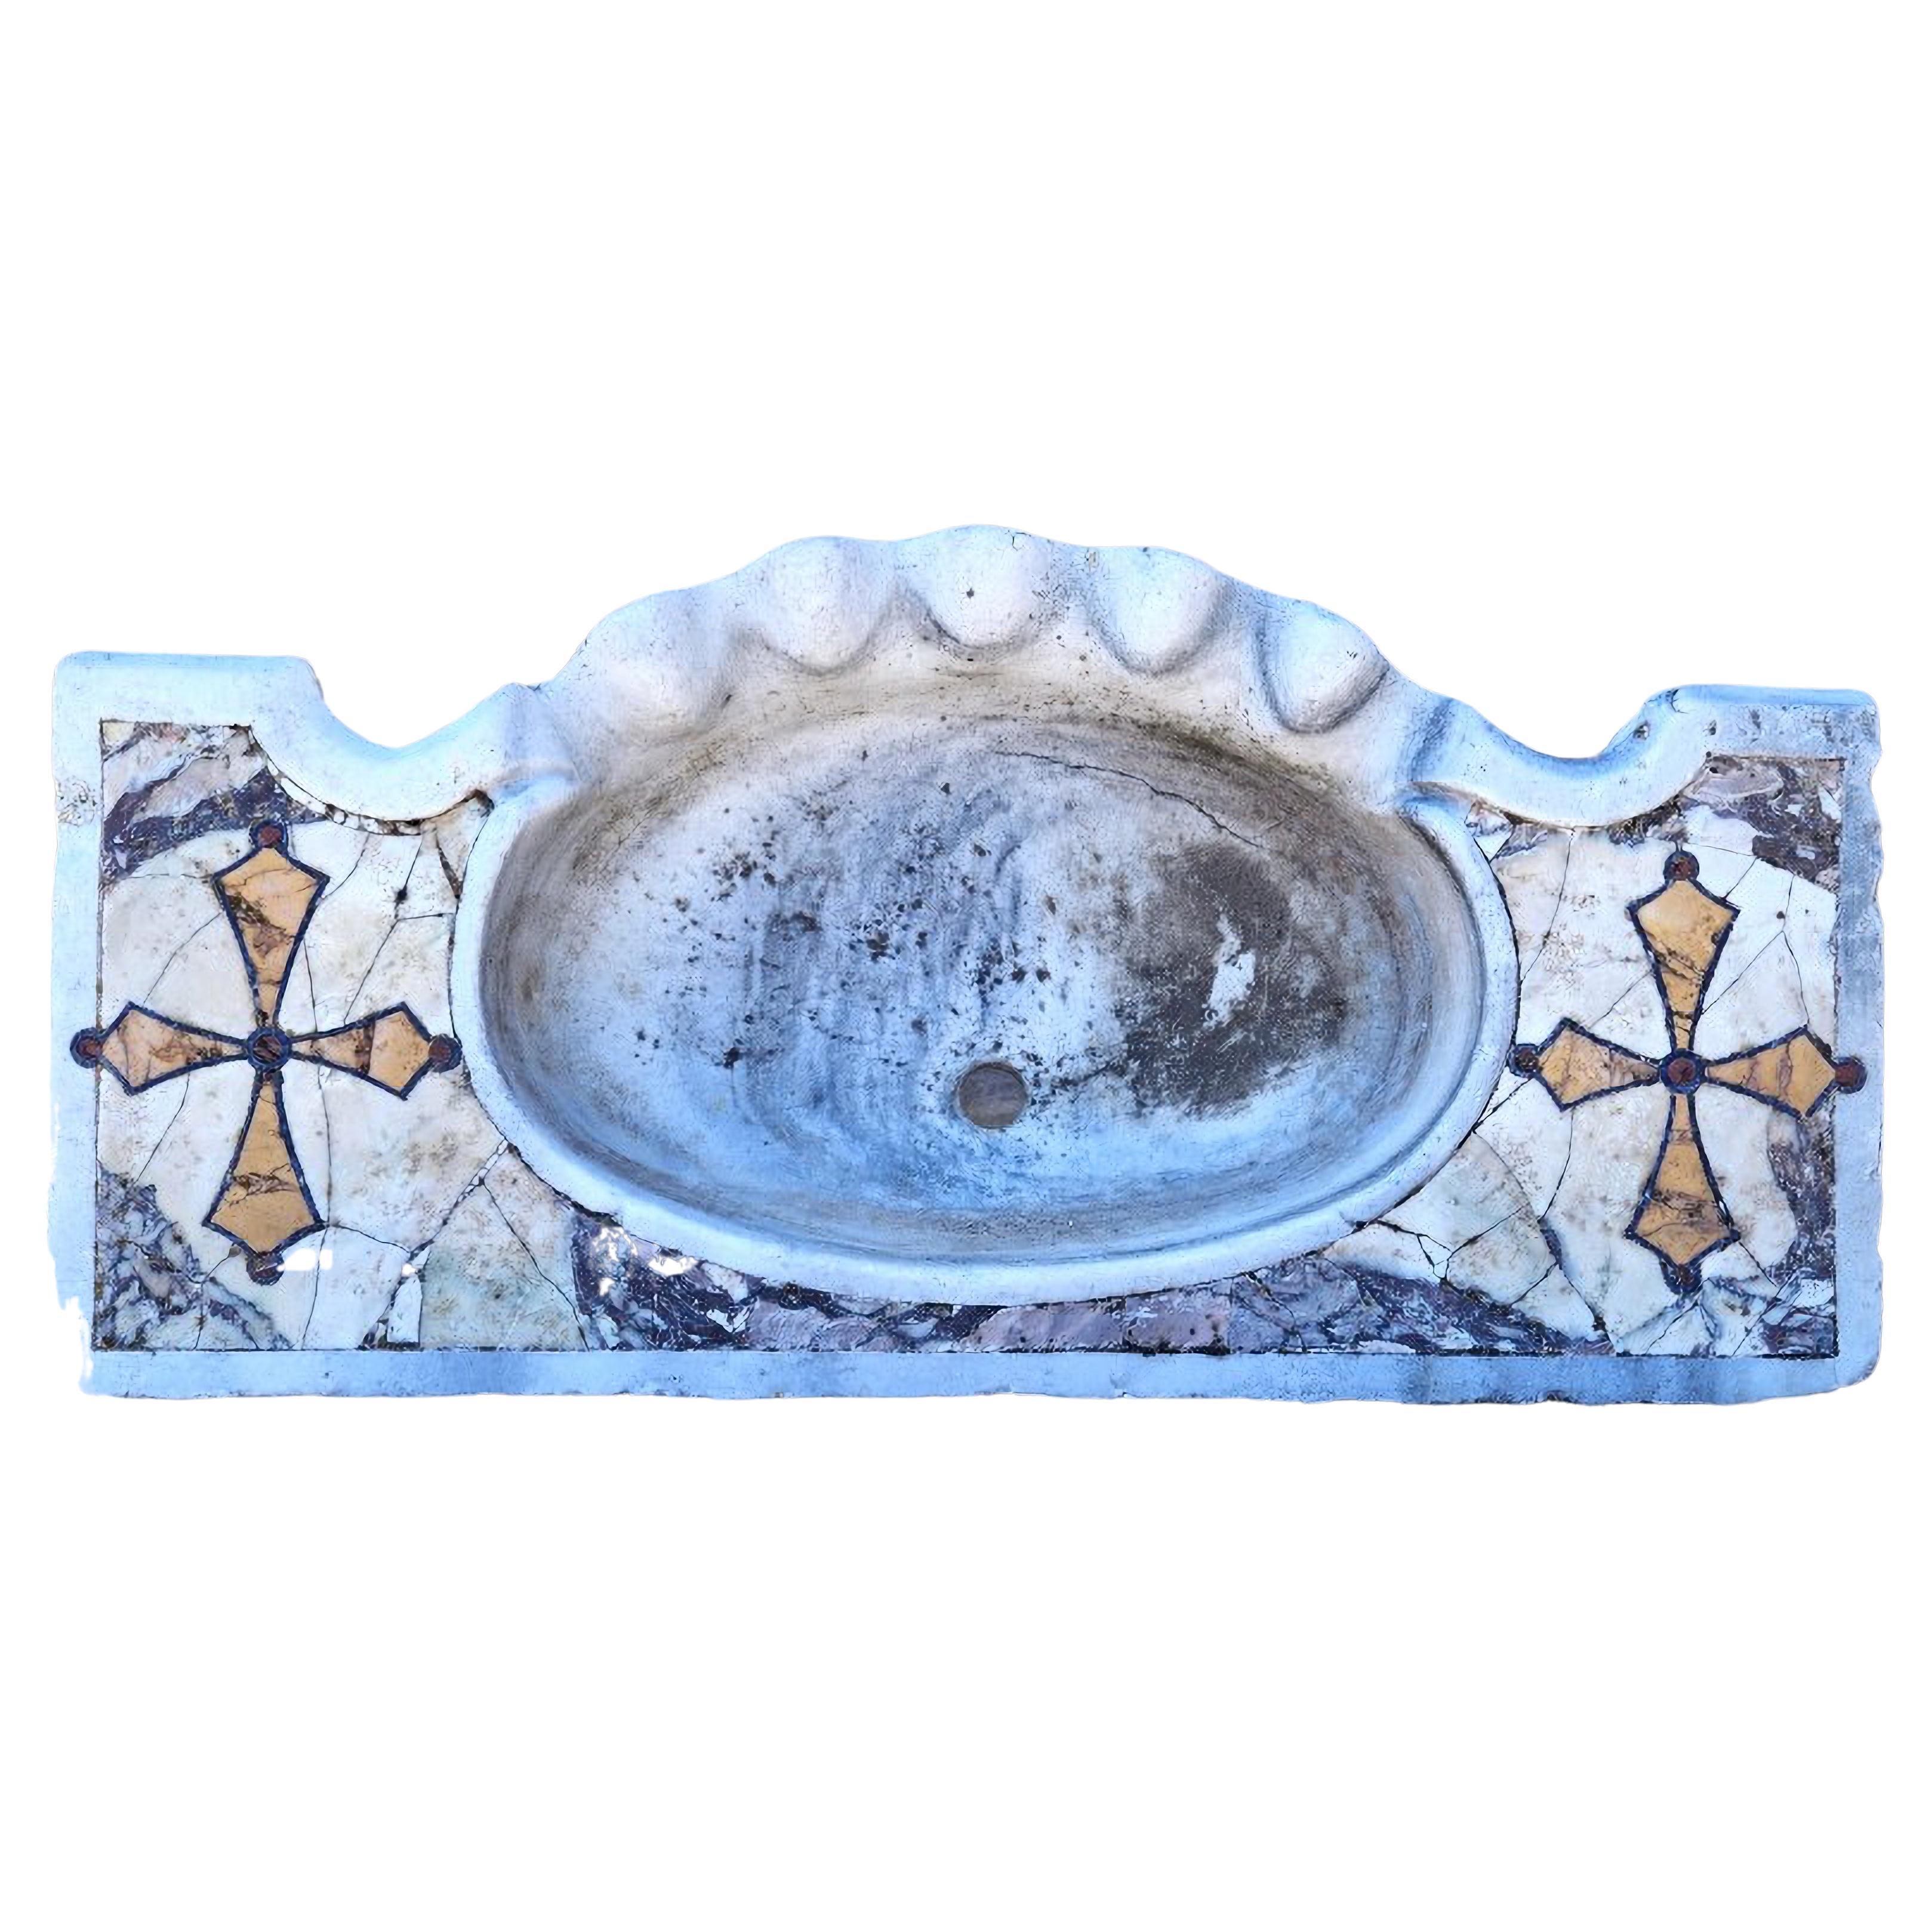 Spectacular Antique Sink in Olimpico Marble with Tarsie Early 19th Century For Sale